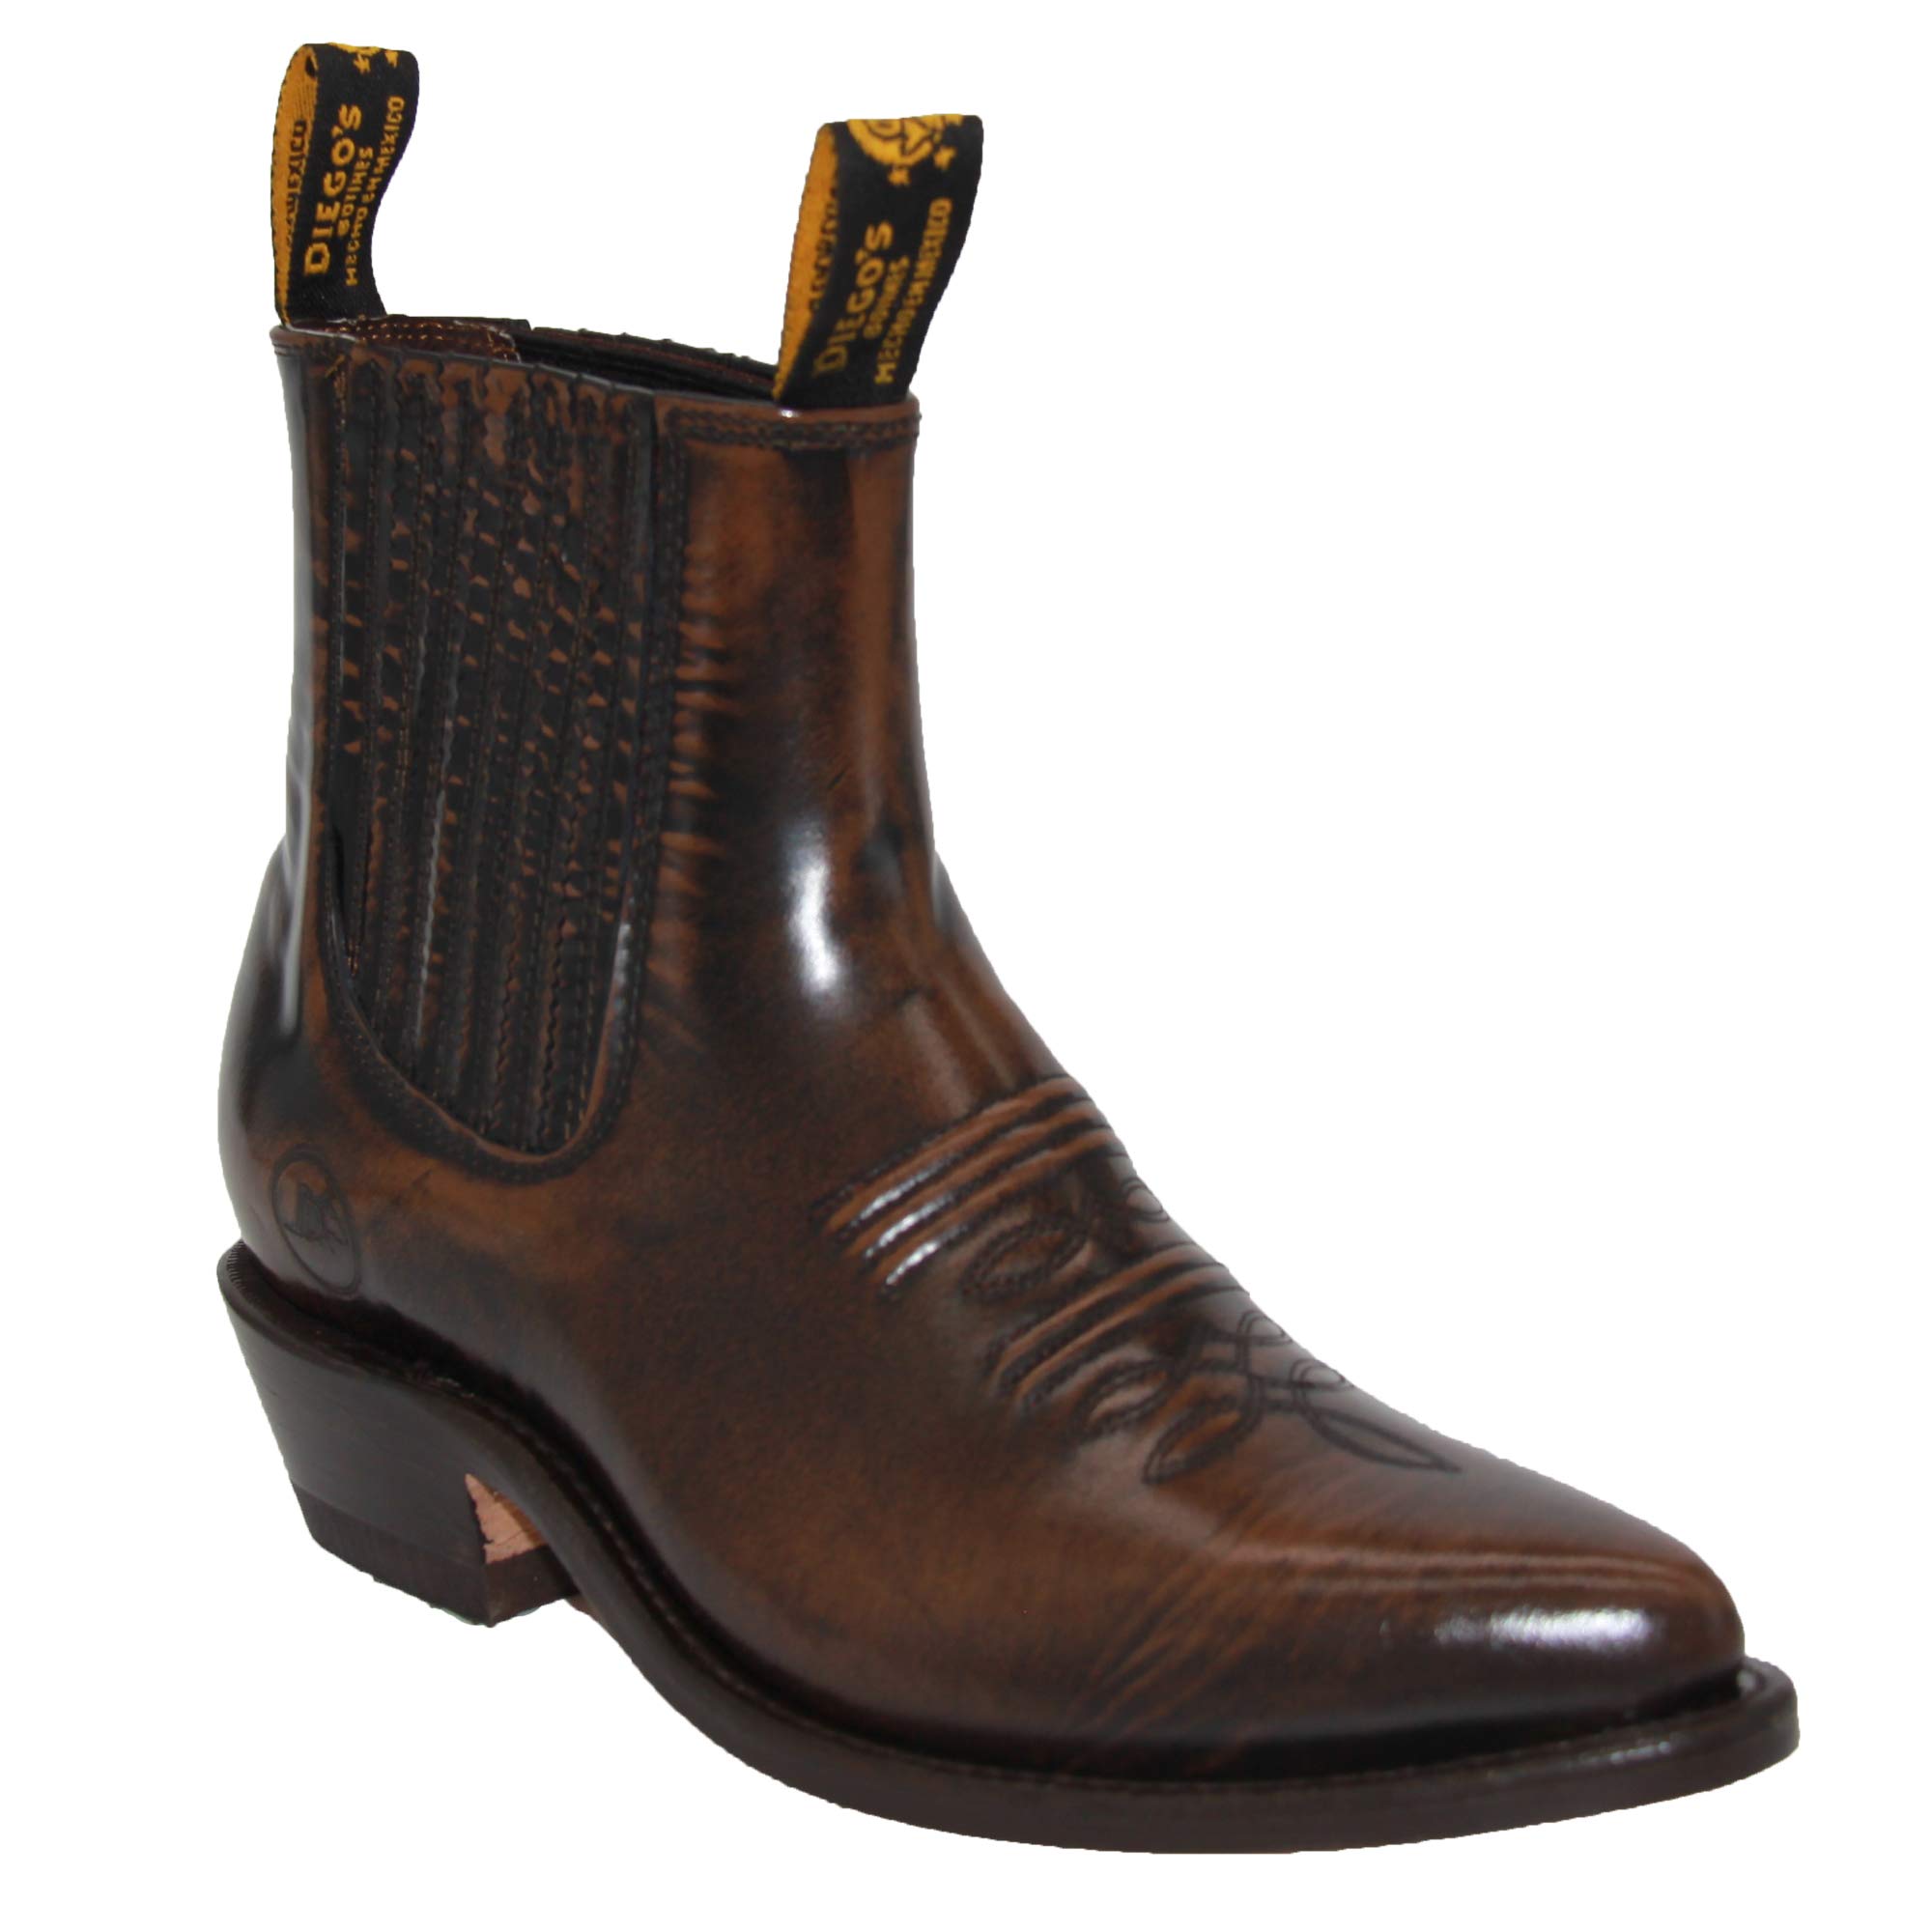 The Western Shops Men's Genuine Leather Short Ankle Cowboy, Charro Botin - image 1 of 5